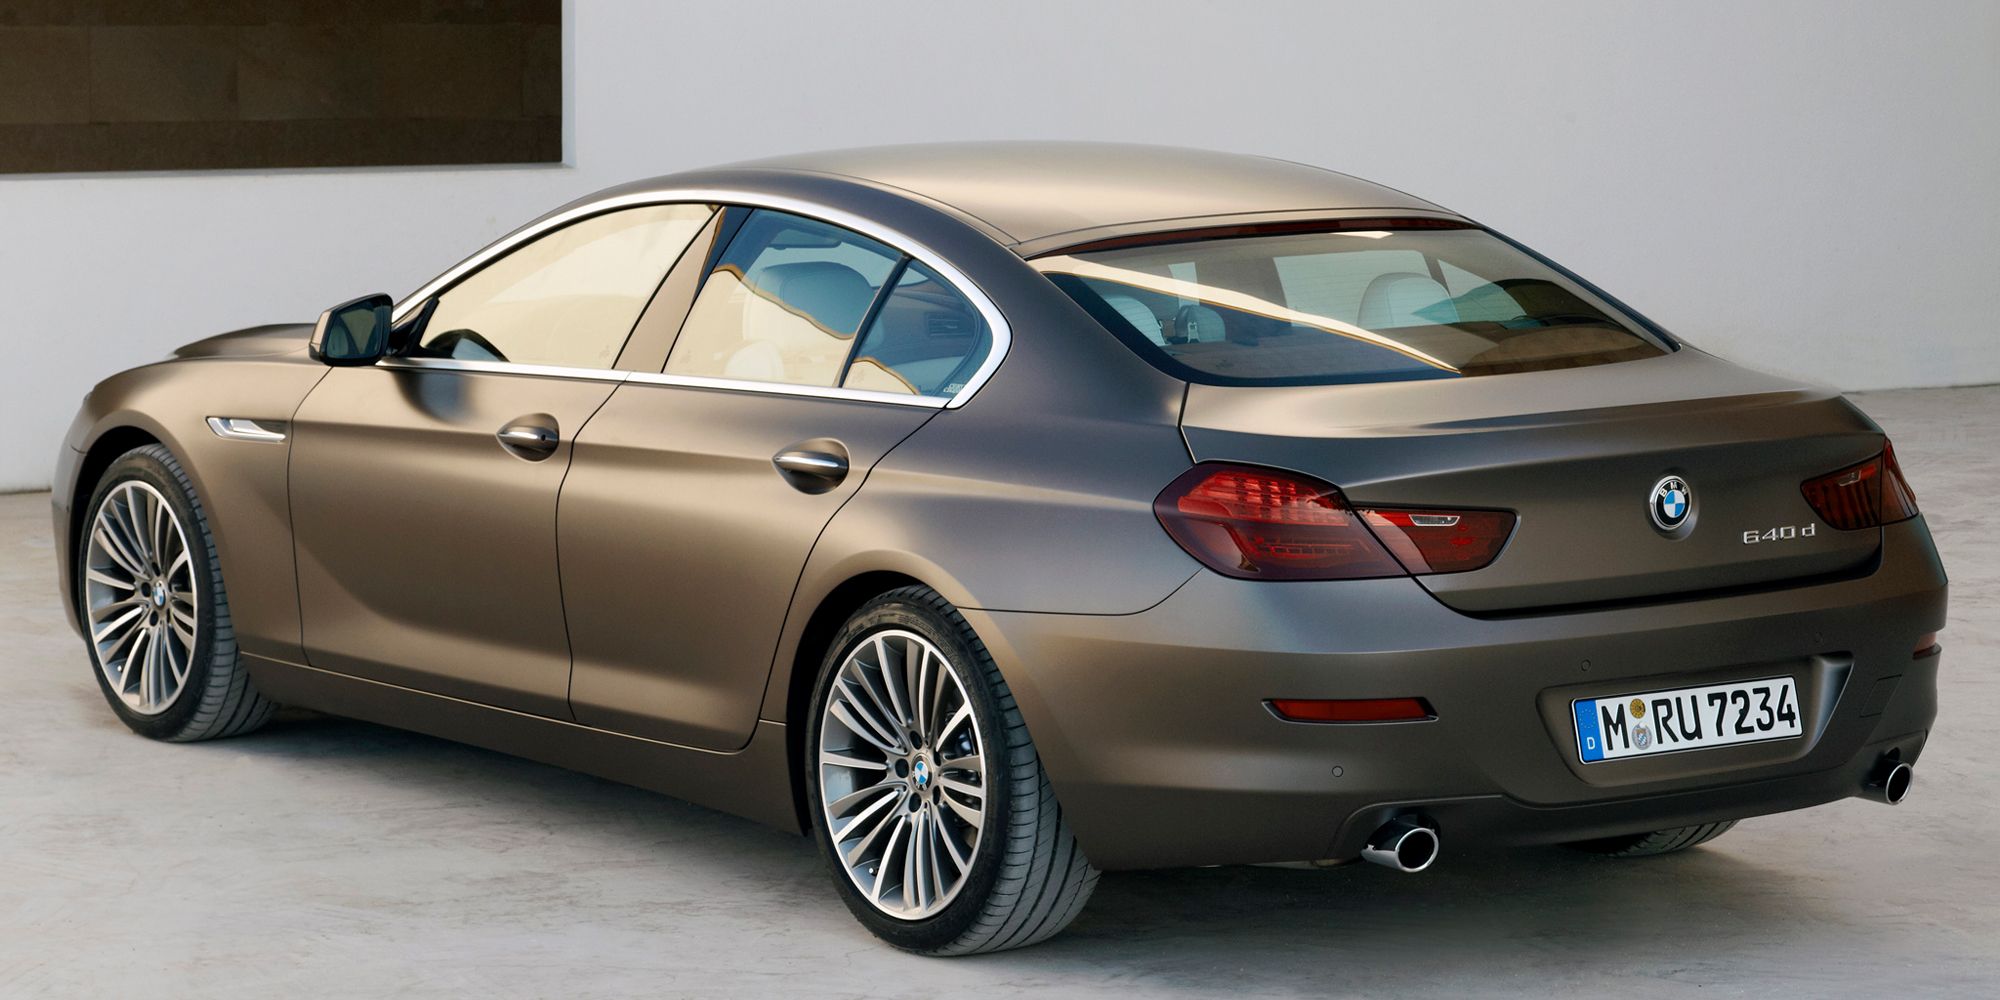 The rear of the 6 Gran Coupe